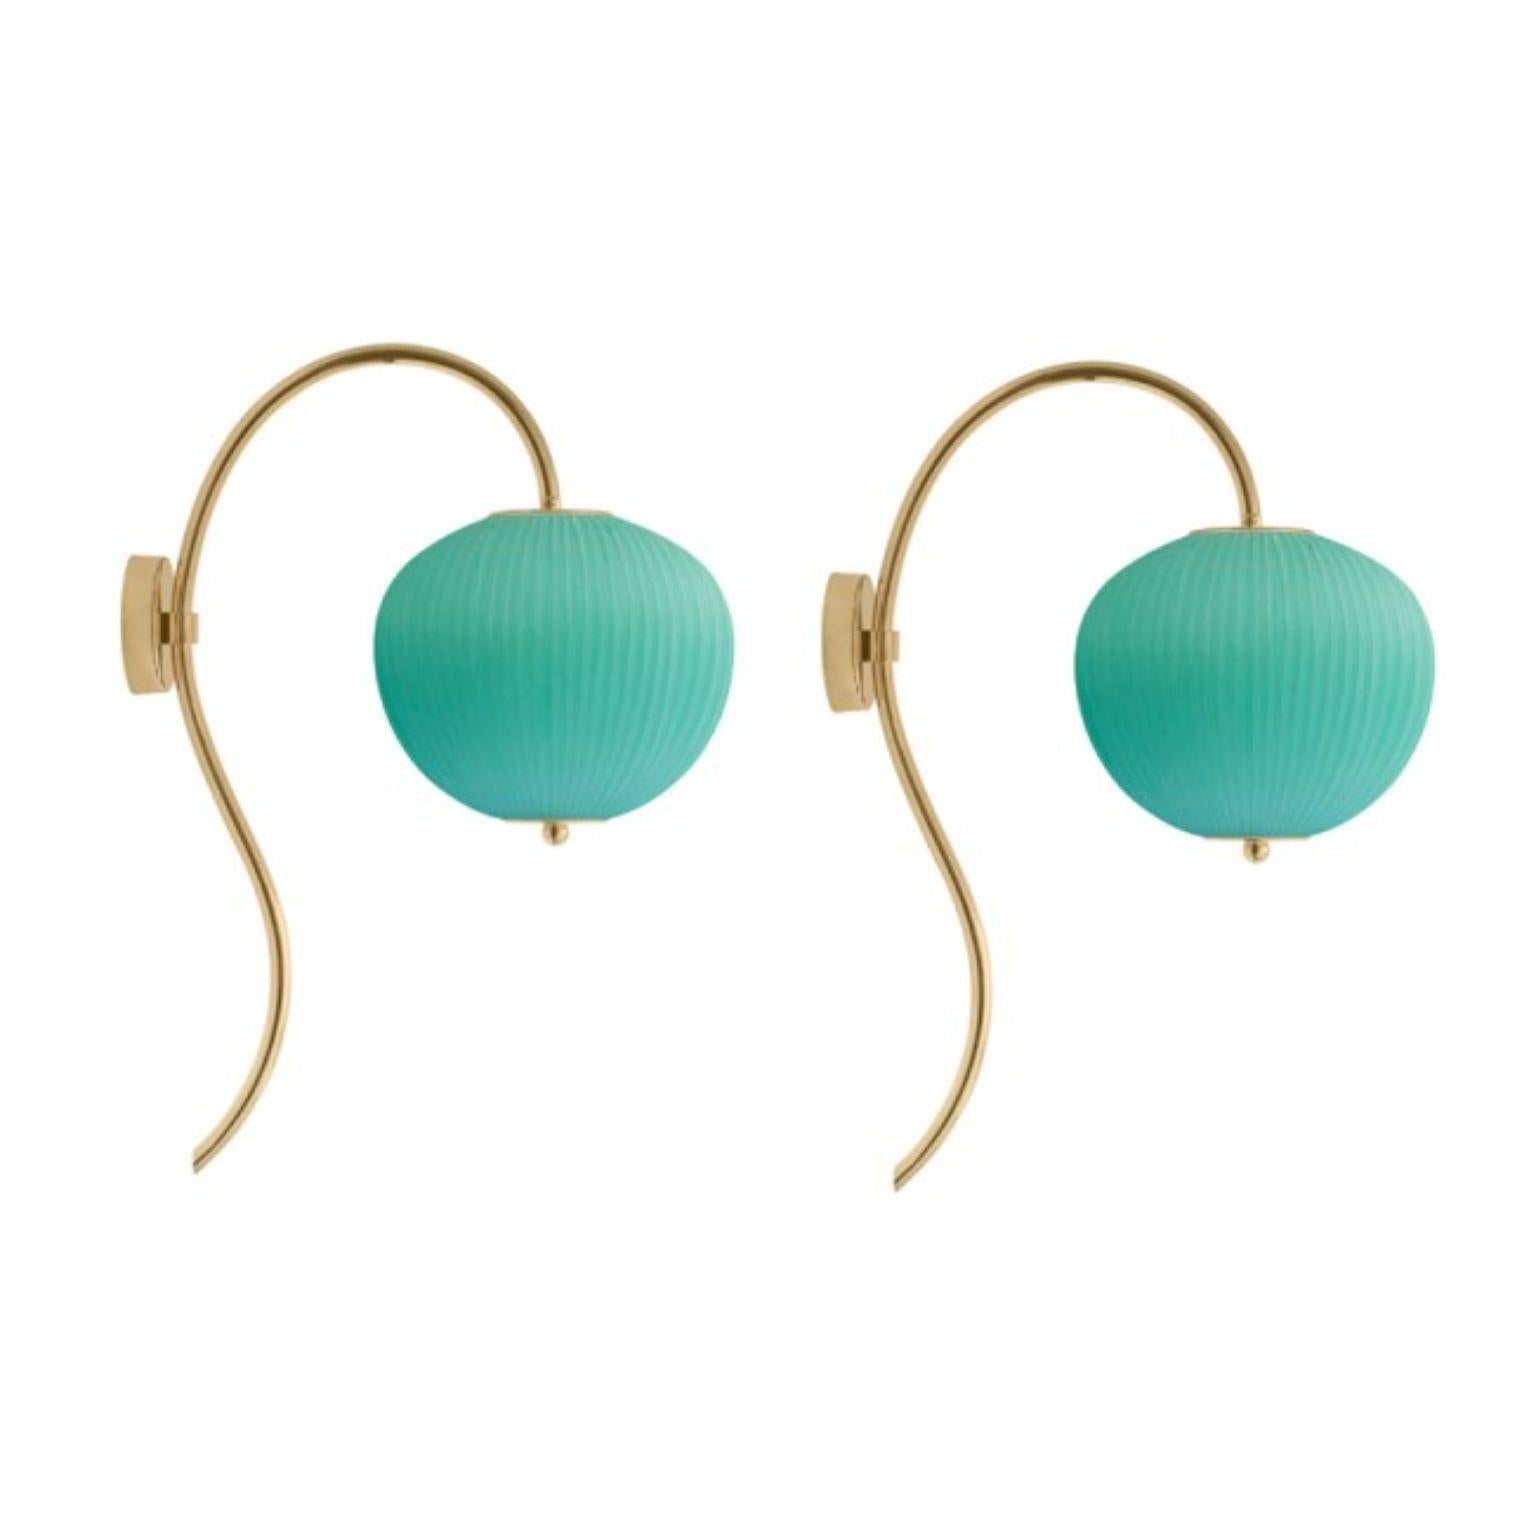 Wall lamp China 03 by Magic Circus Editions
Dimensions: H 62 x W 26.2 x D 41.5 cm
Materials: Brass, mouth blown glass sculpted with a diamond saw
Colour: jade green

Available finishes: Brass, nickel
Available colours: enamel soft white, soft